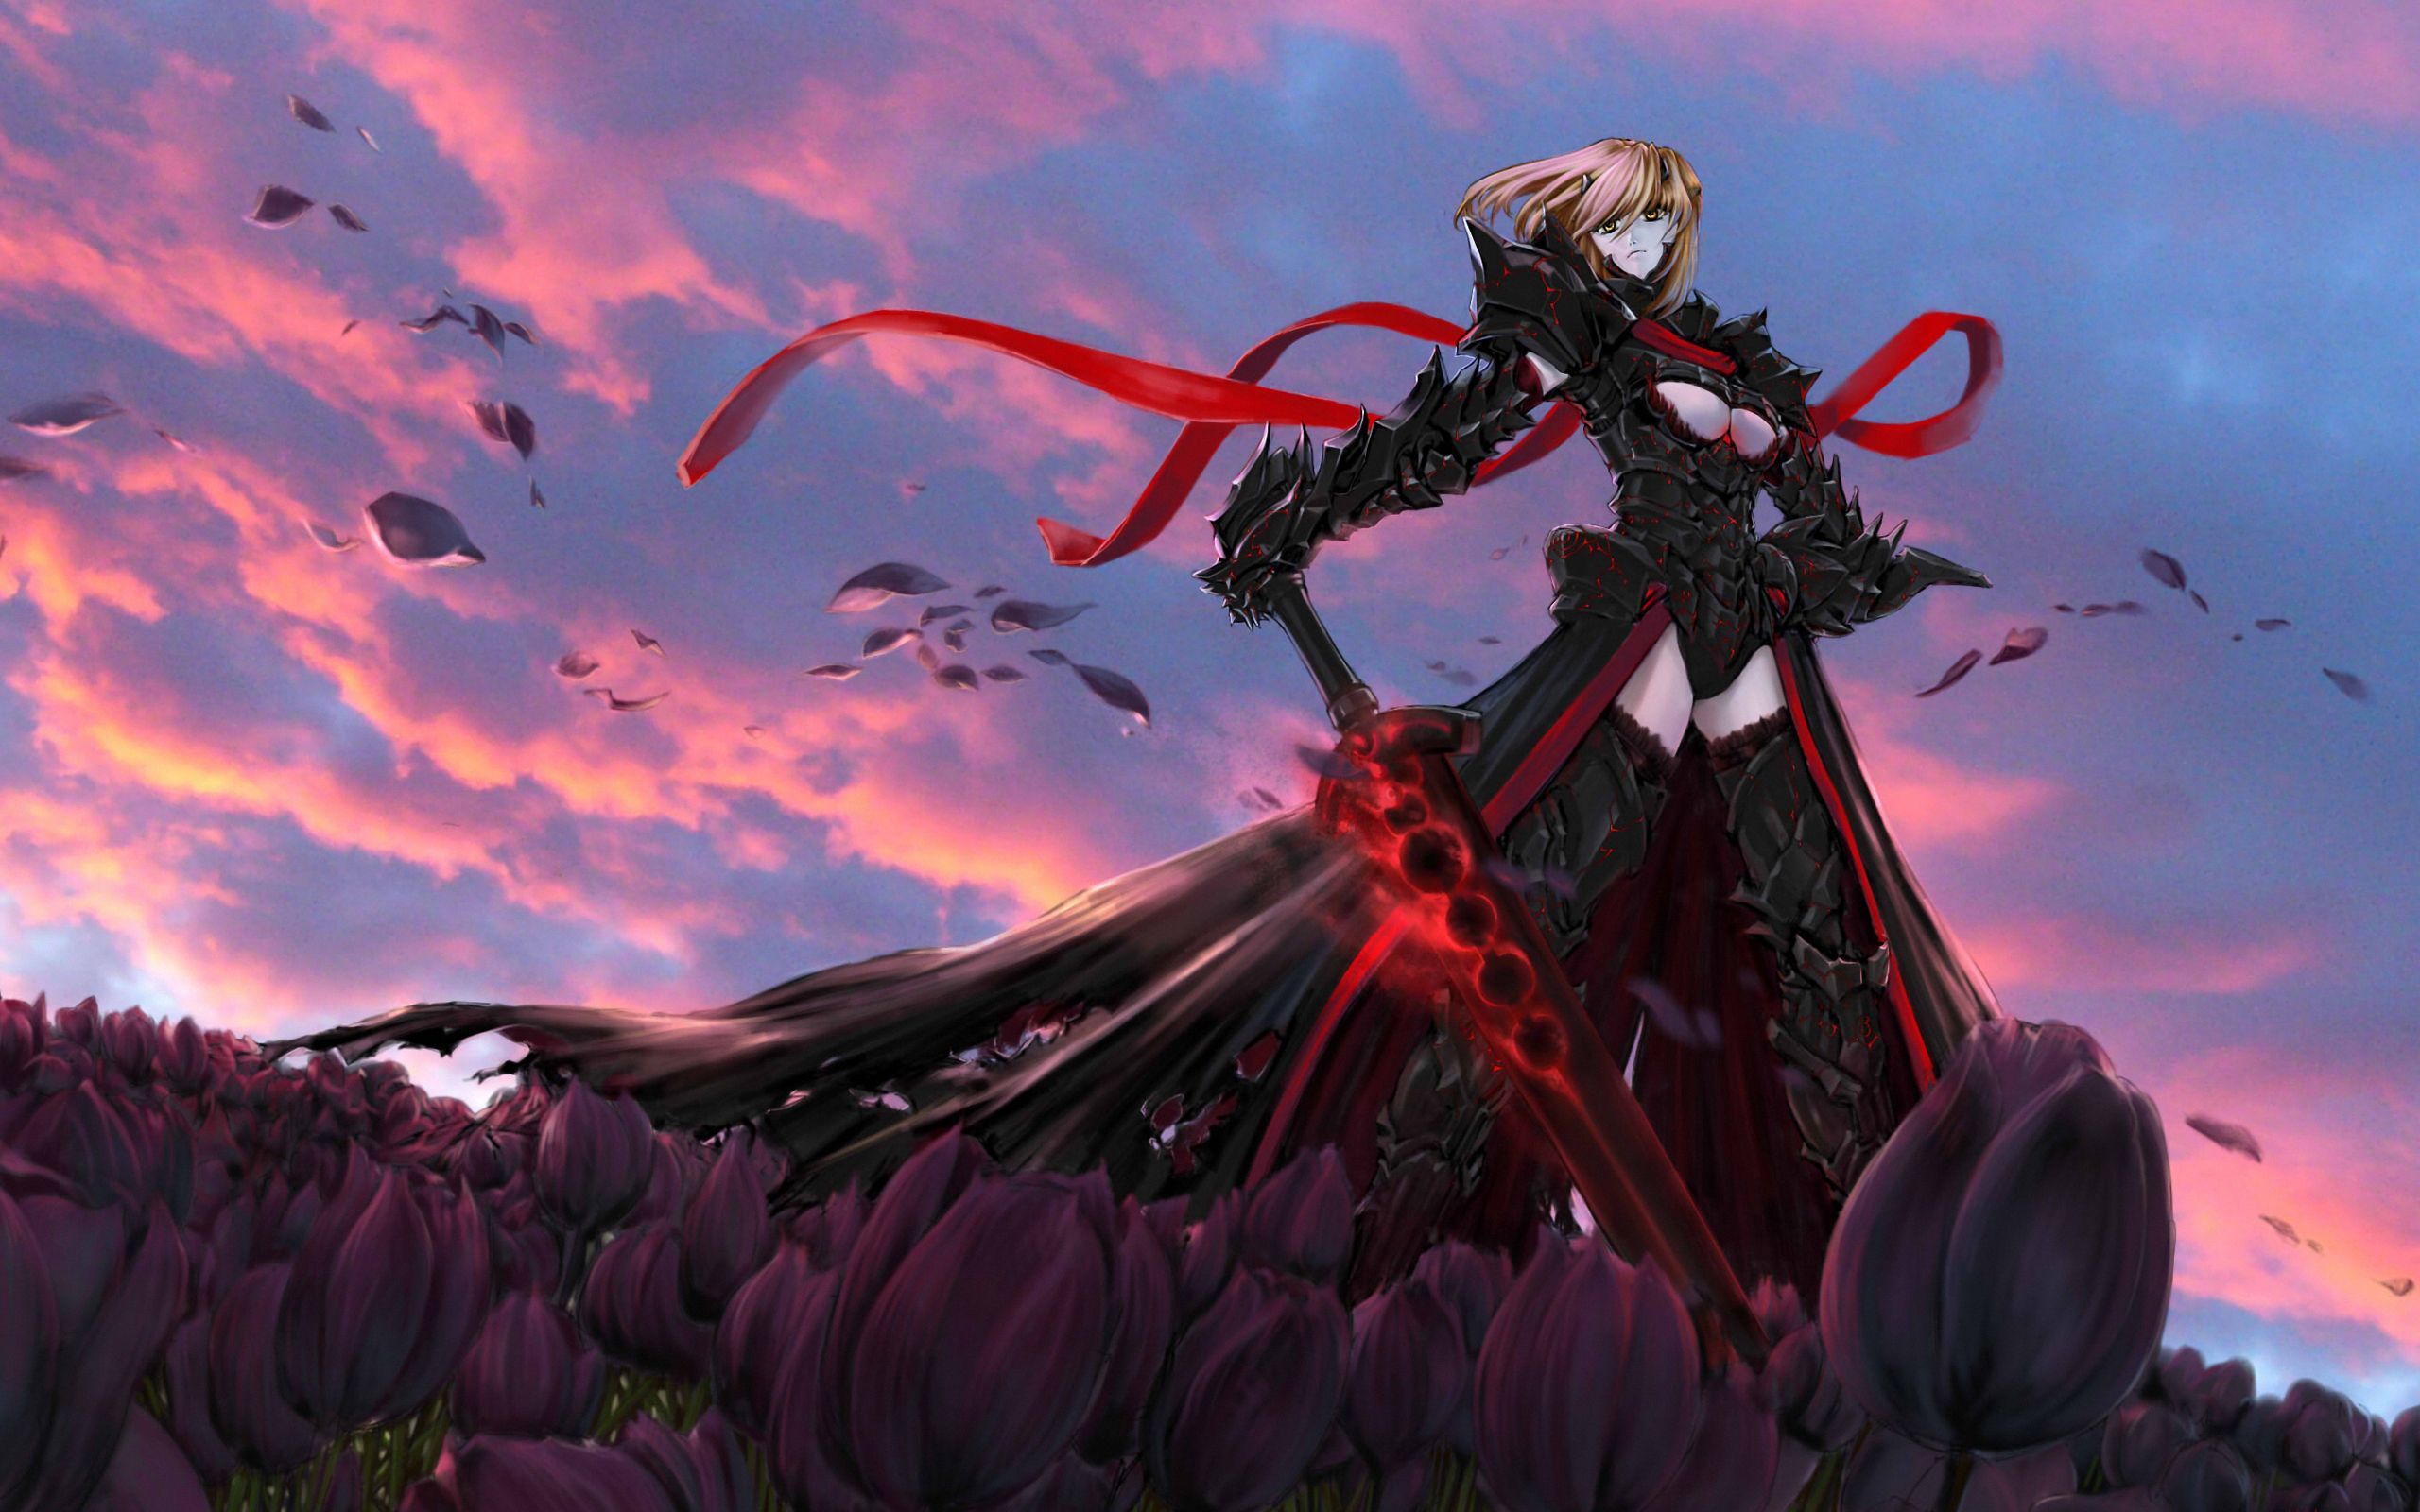 Fate/Stay Night Computer Wallpapers, Desktop Backgrounds ...